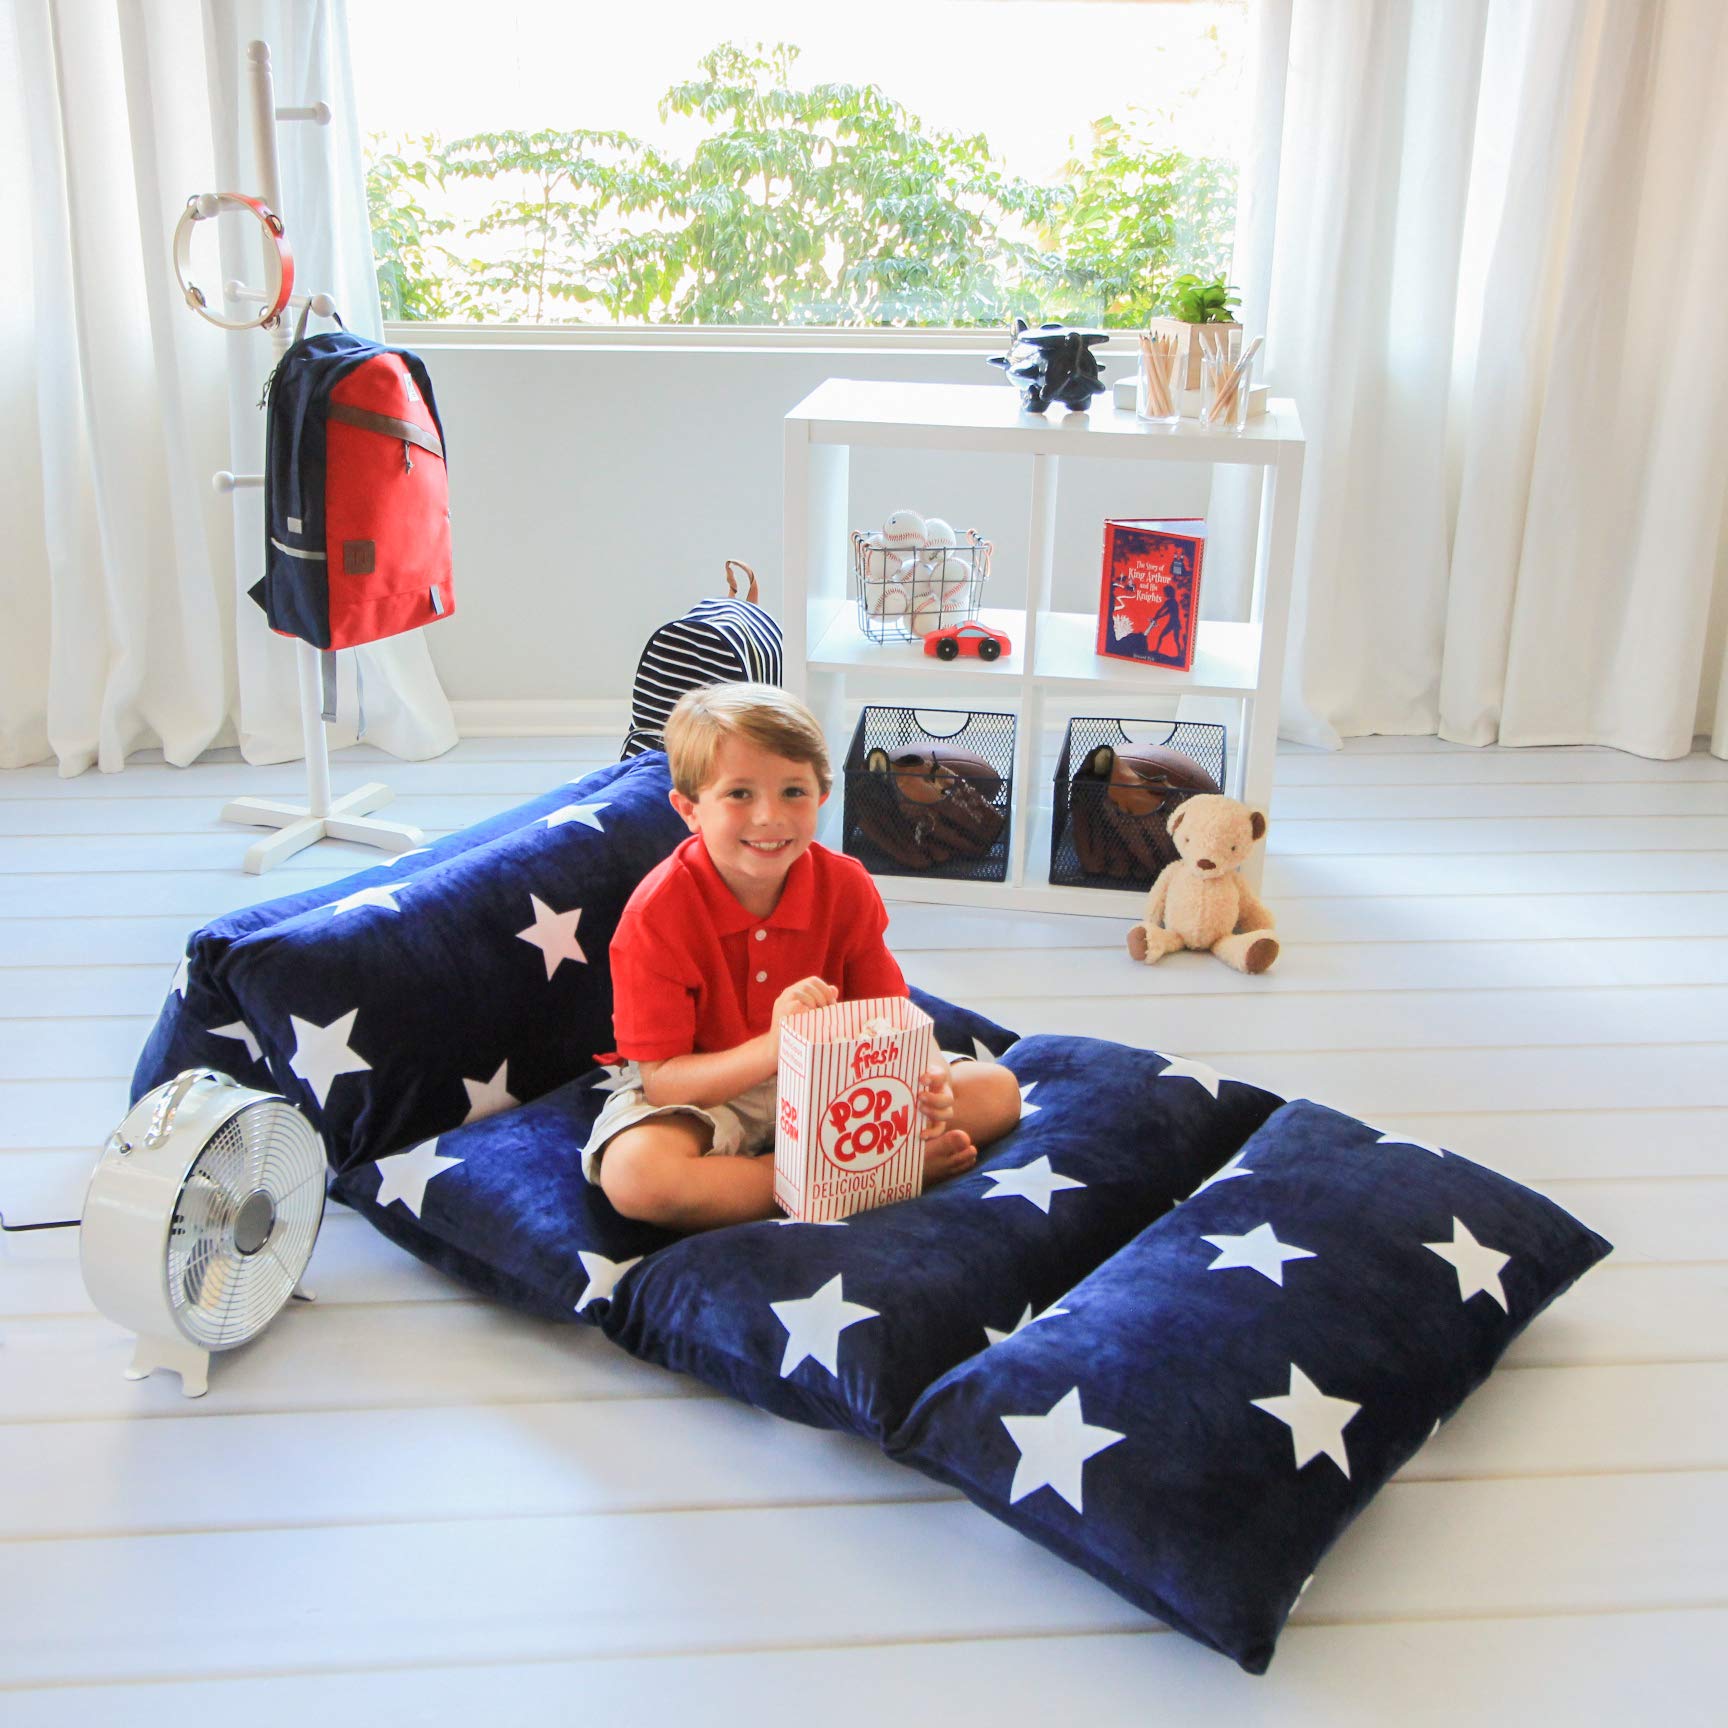 Butterfly Craze Pillow Bed Floor Lounger Cover - Perfect Recliner Floor Pillow for Kids & Pillow Lounger for Reading Playing Games - Navy White Stars, Queen